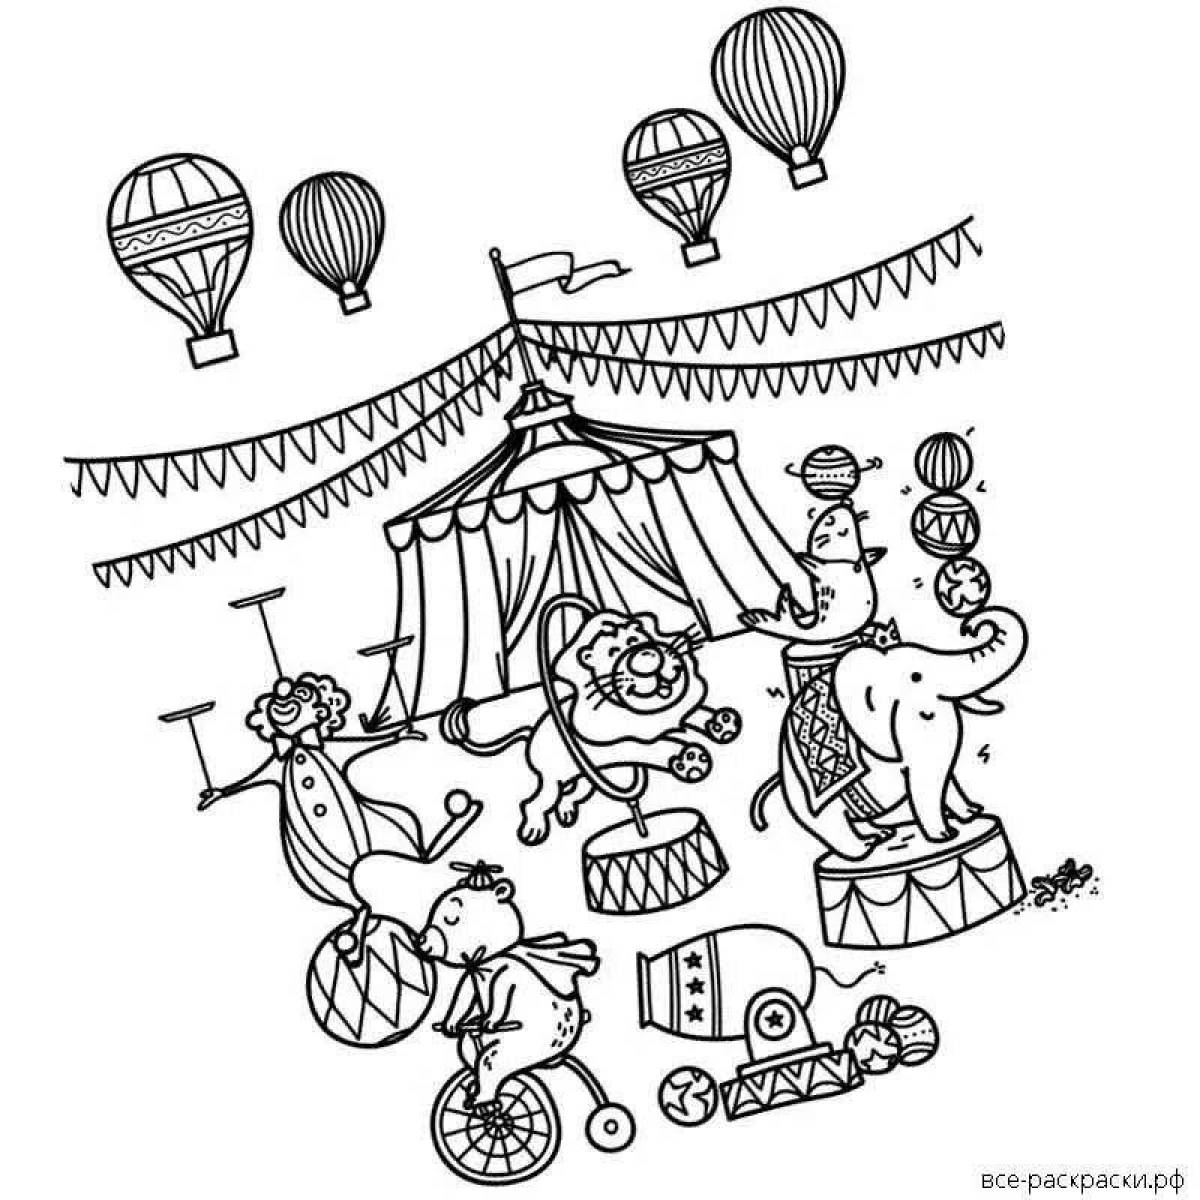 Outstanding circus coloring book for 6-7 year olds